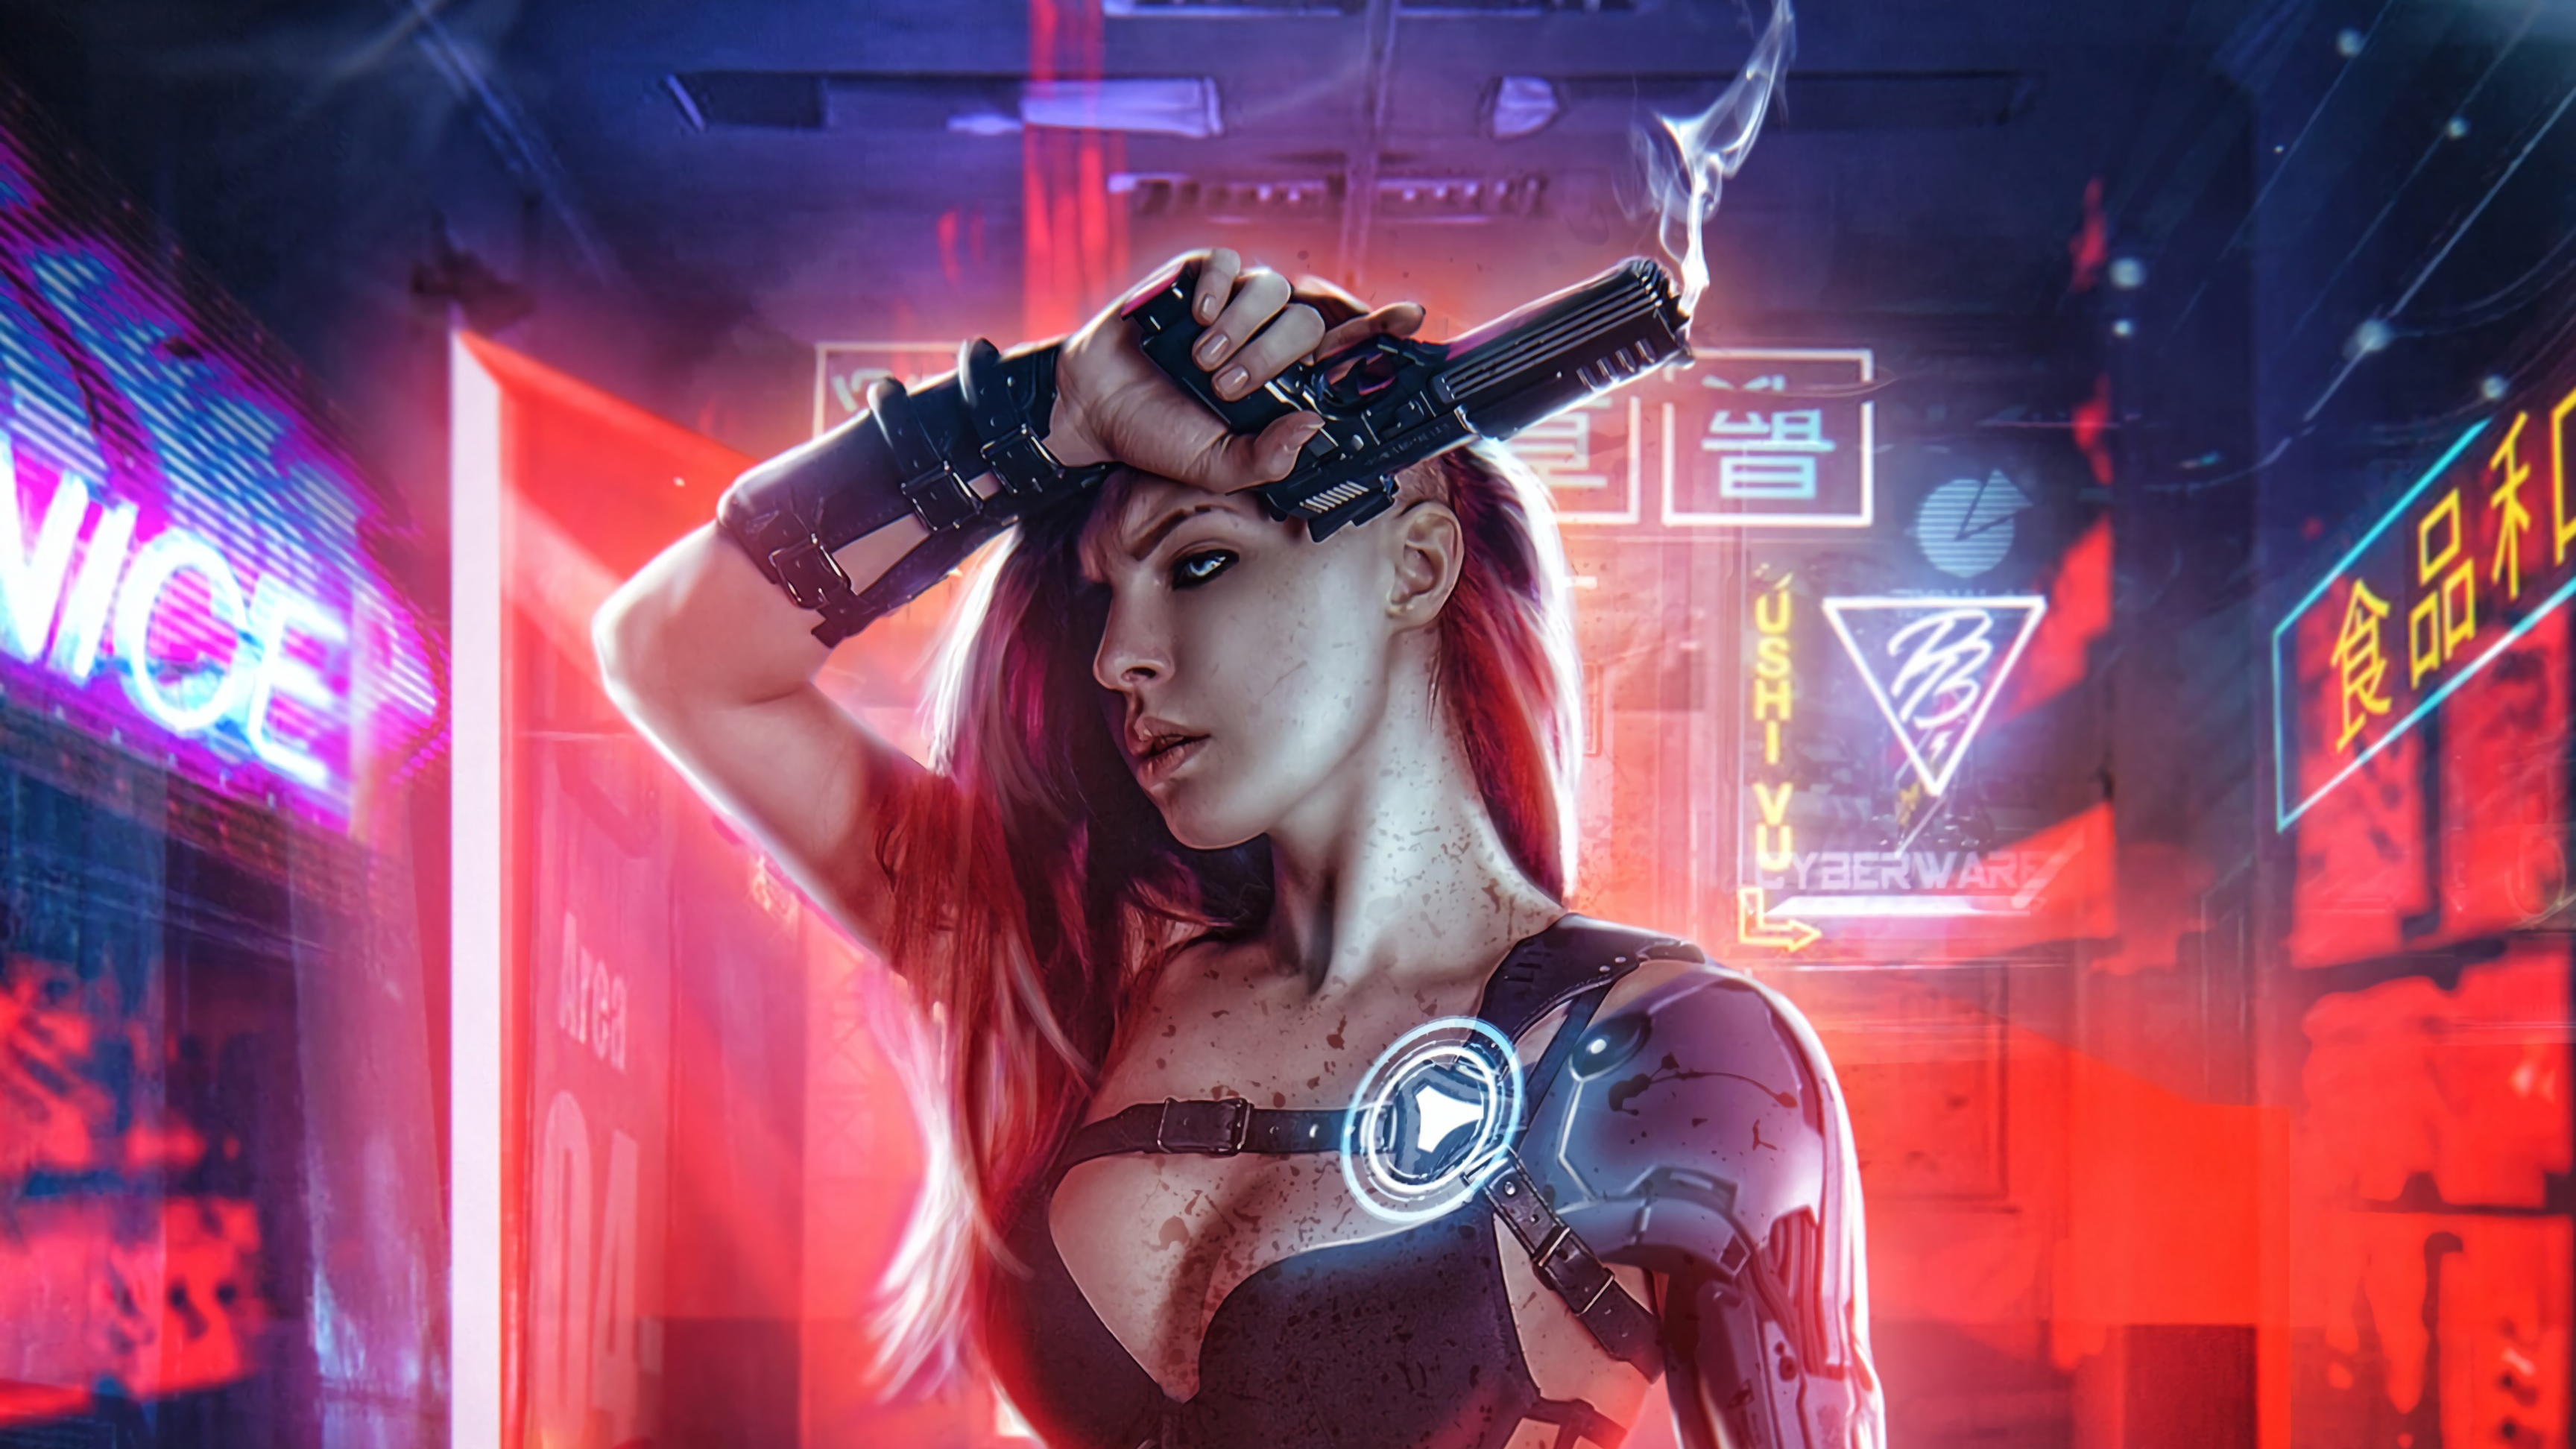 Cyberpunk Girl With Gun 4k Hd Artist 4k Wallpapers Images Backgrounds Photos And Pictures 9713